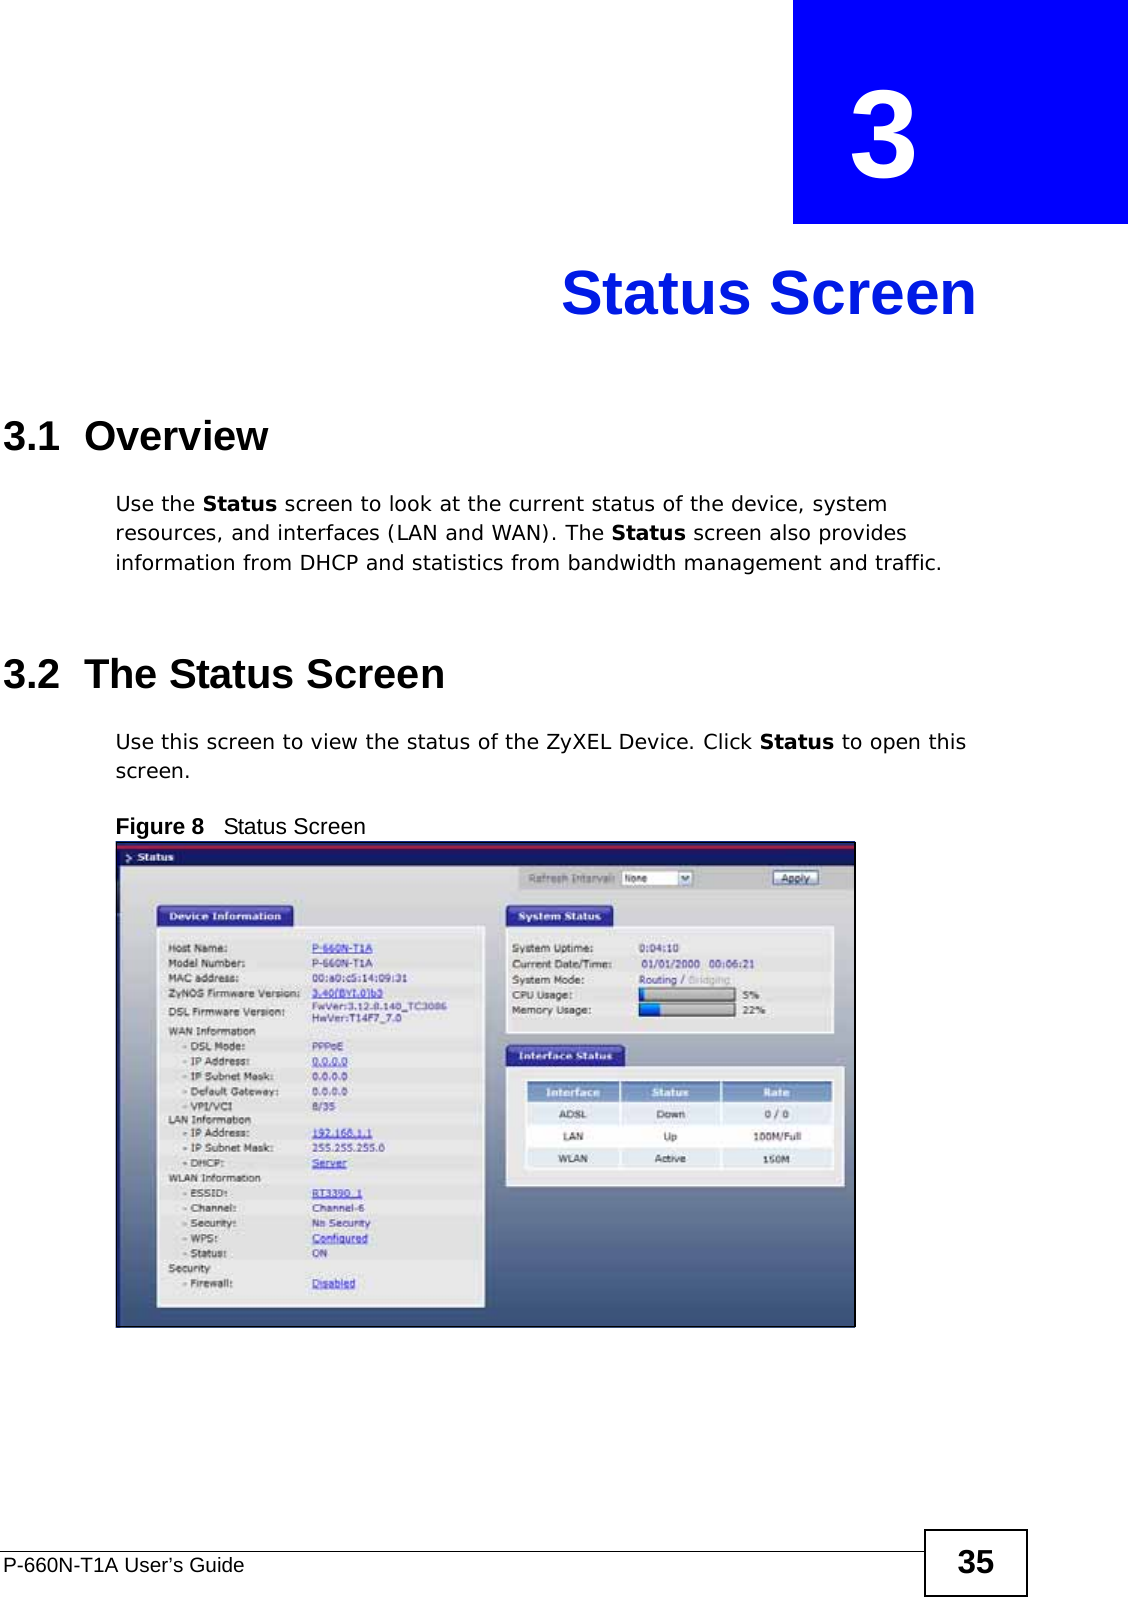 P-660N-T1A User’s Guide 35CHAPTER  3 Status Screen3.1  OverviewUse the Status screen to look at the current status of the device, system resources, and interfaces (LAN and WAN). The Status screen also provides information from DHCP and statistics from bandwidth management and traffic.3.2  The Status Screen Use this screen to view the status of the ZyXEL Device. Click Status to open this screen.Figure 8   Status Screen